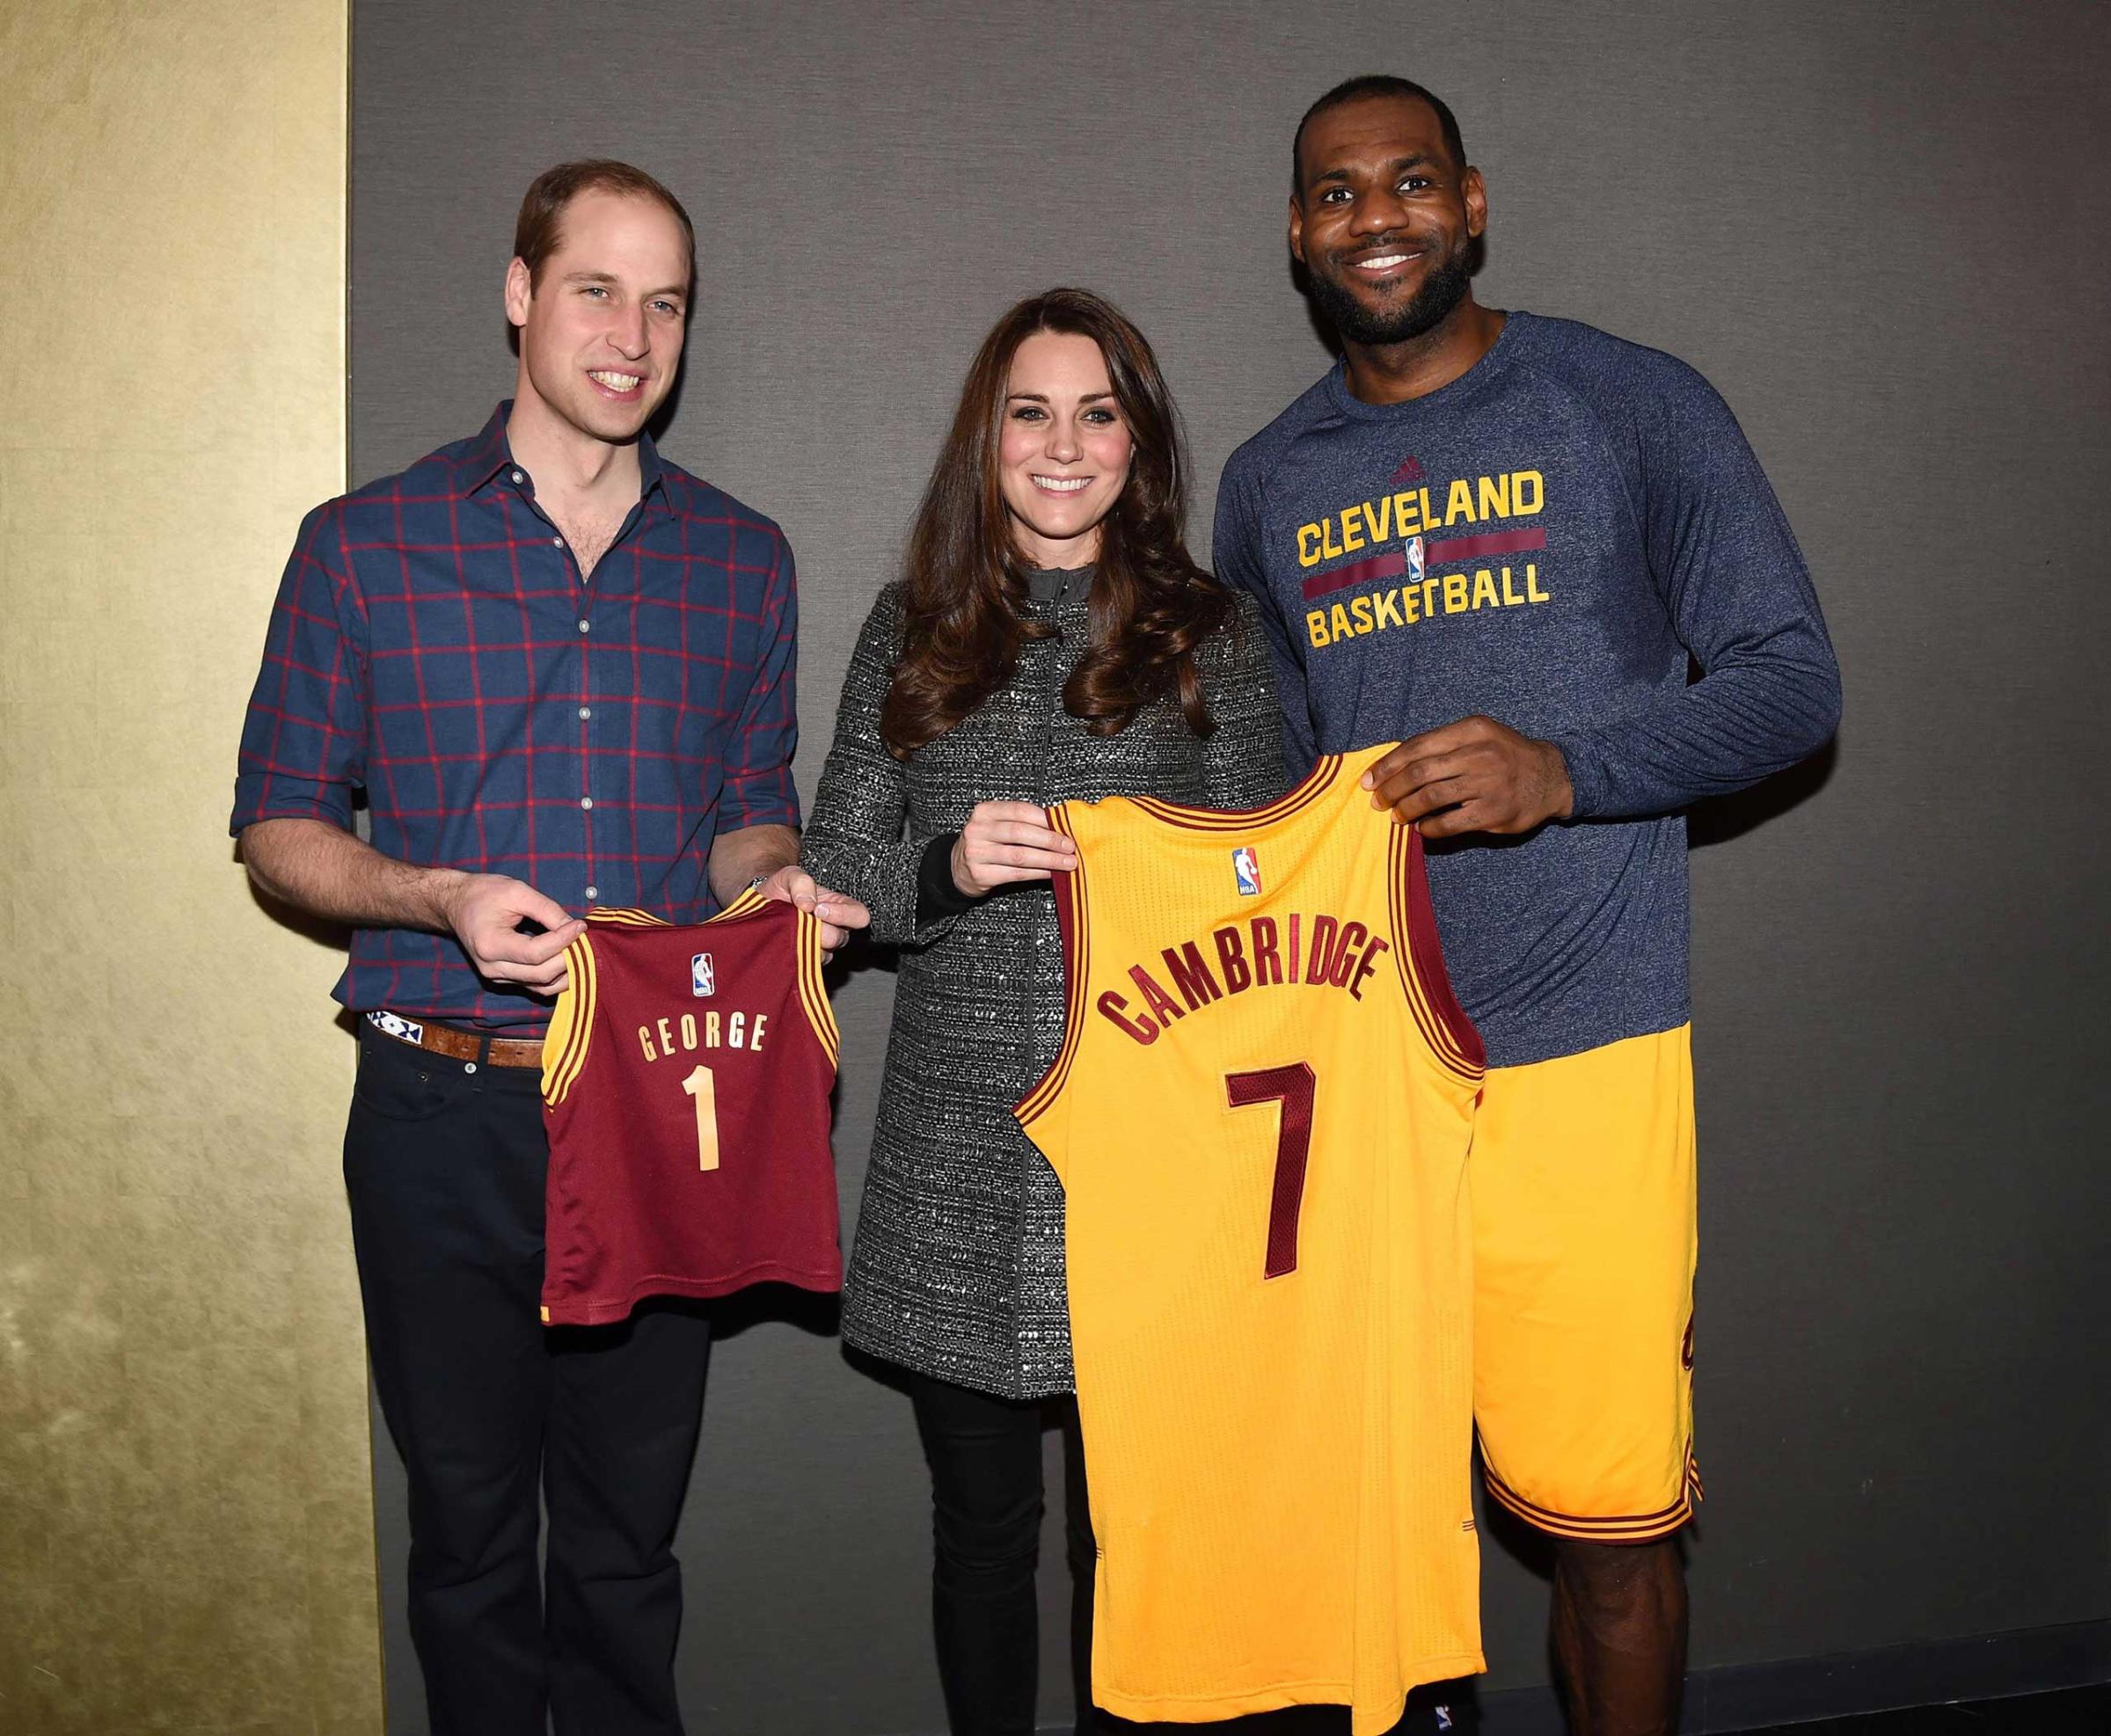 The Duke And Duchess Of Cambridge Attend Cleveland Cavaliers v Brooklyn Nets